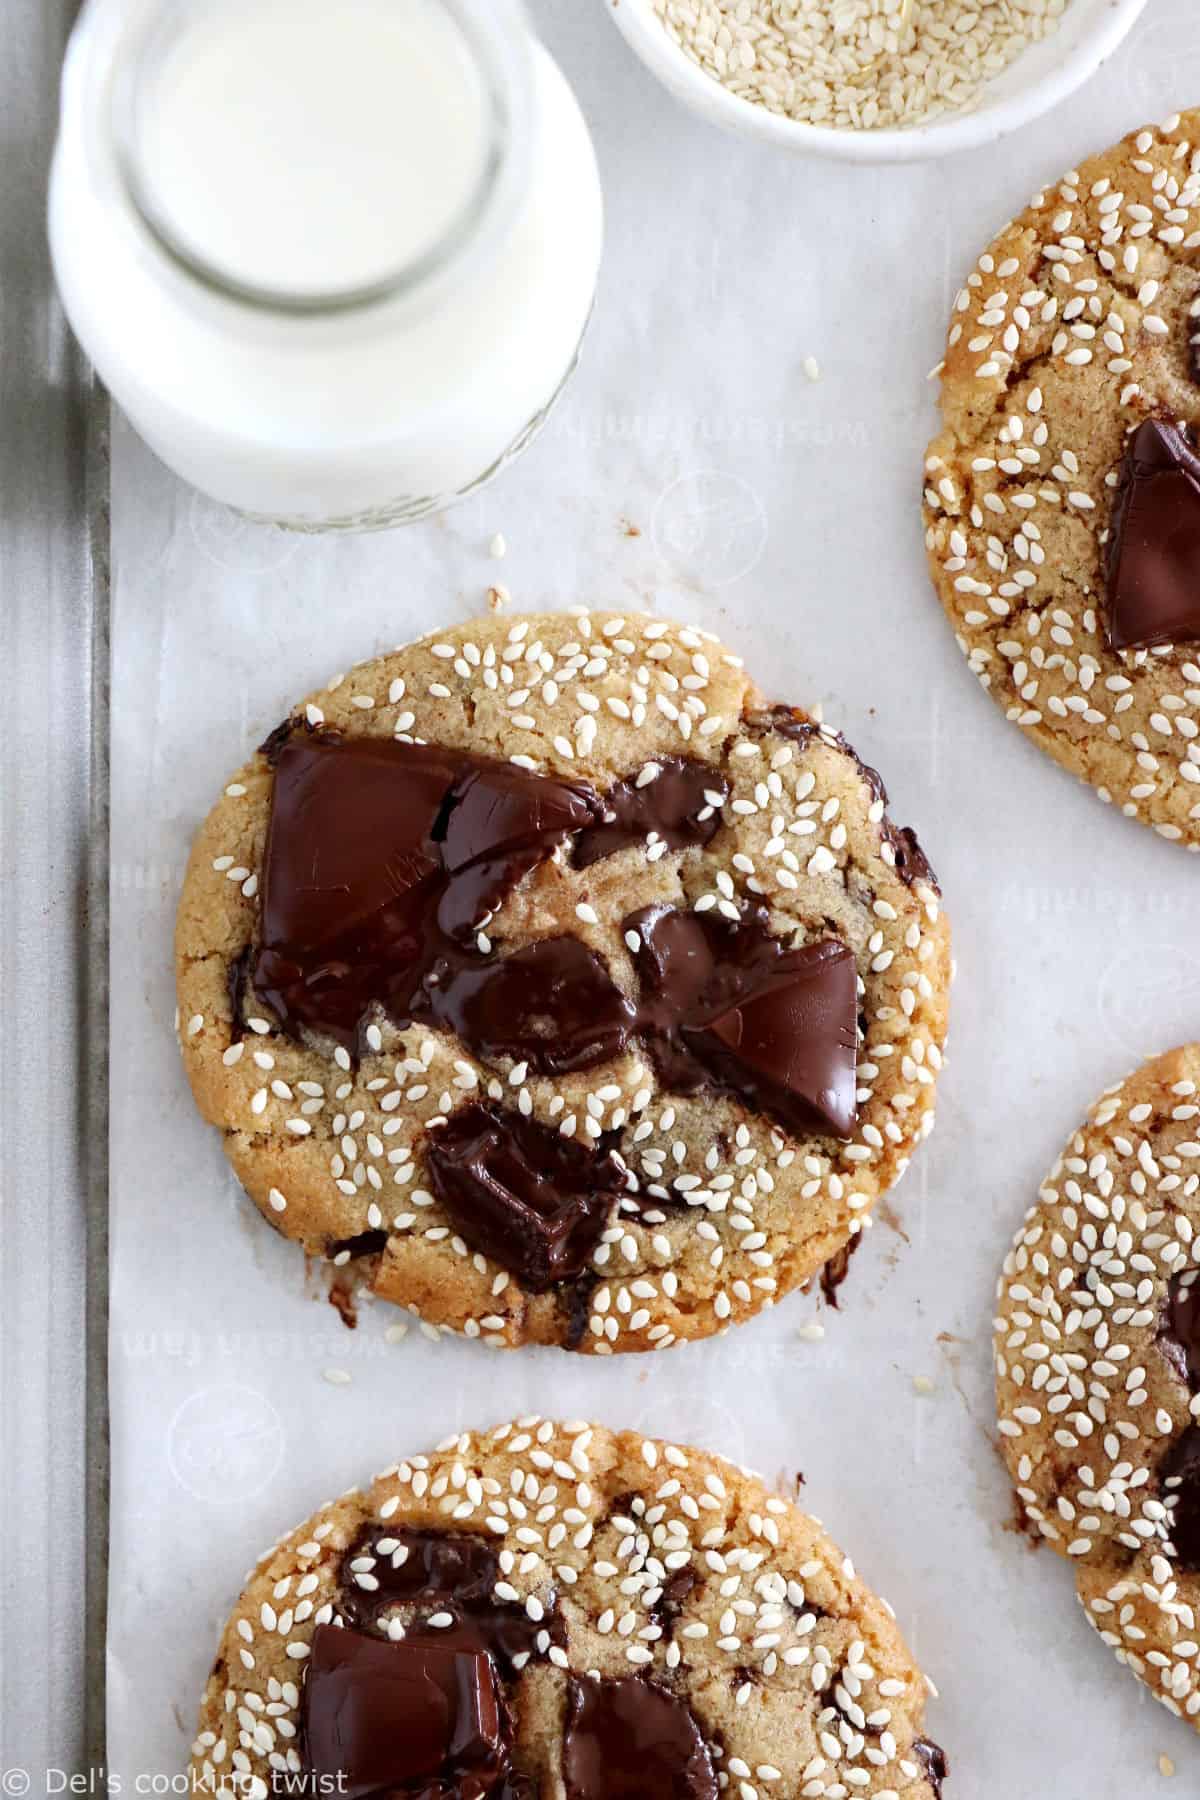 These brown butter miso chocolate chip cookies are loaded with umami flavors. Both sweet and savory, they are oozing with dark chocolate.